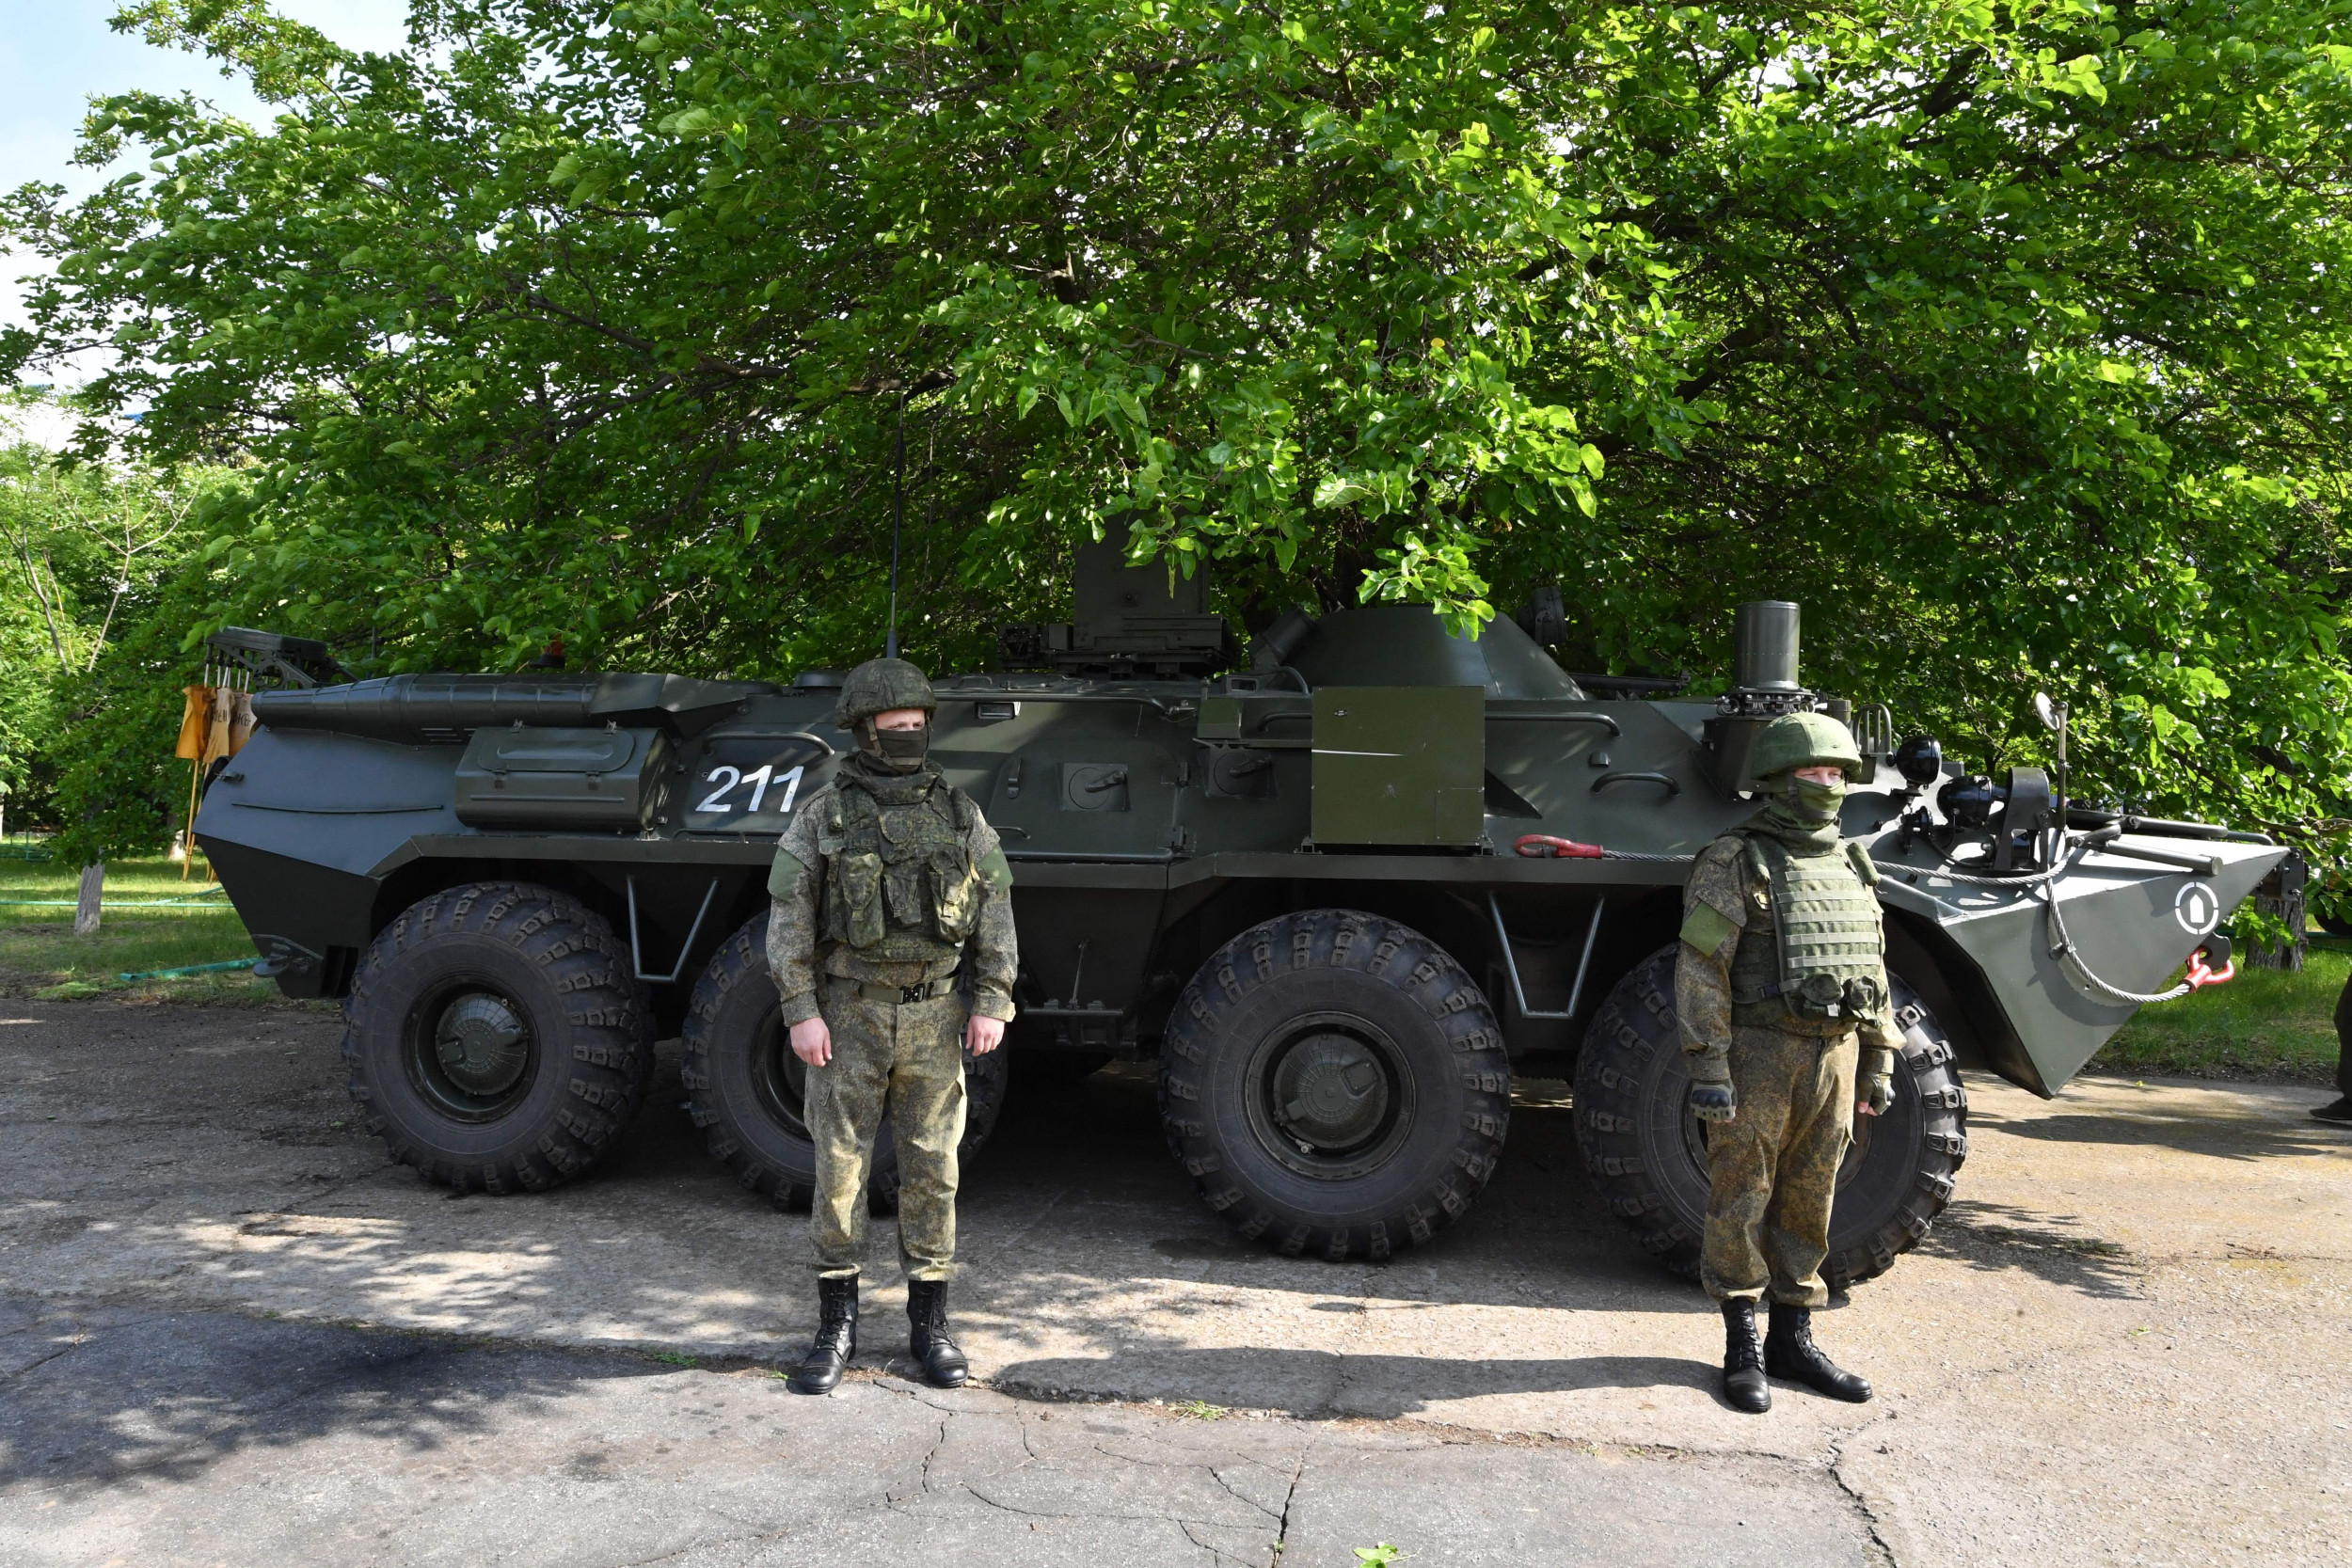 Russia Floods Front Lines With 'Low-Quality Forces': ISW thumbnail